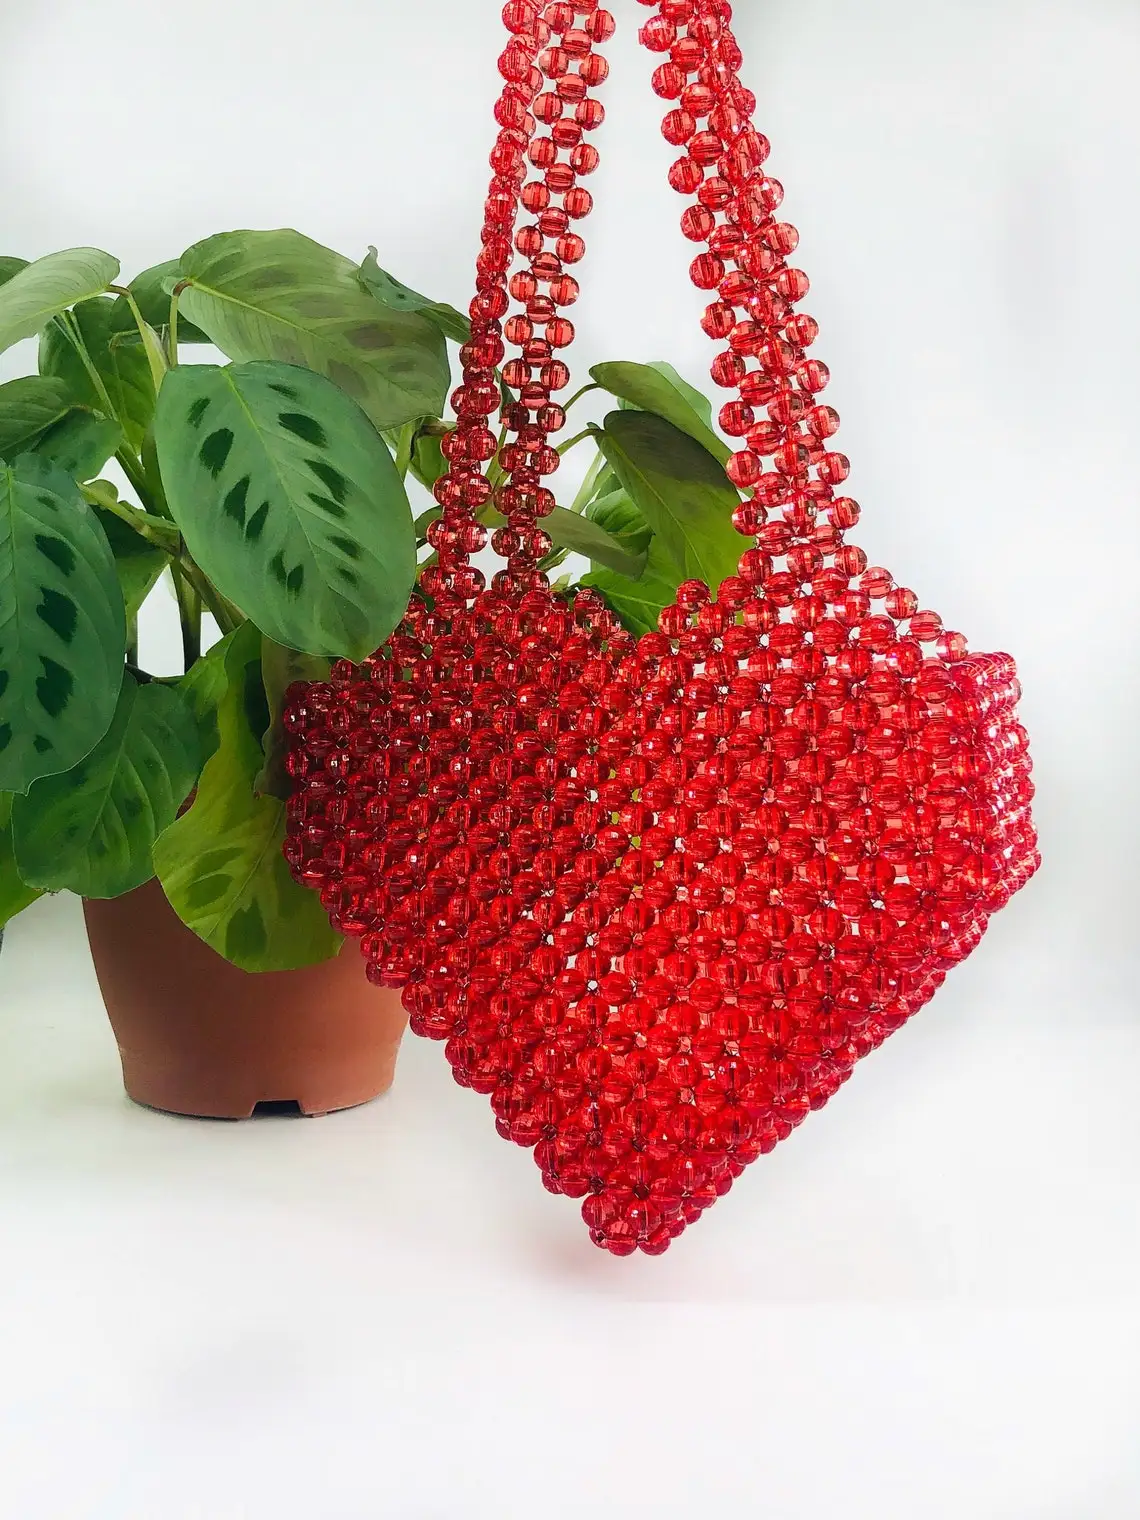 Red Heart Design Women Clutch, Evening Bags Party Wedding Handbags, For Female, Gift Love, Engagement, Customized, Special Day